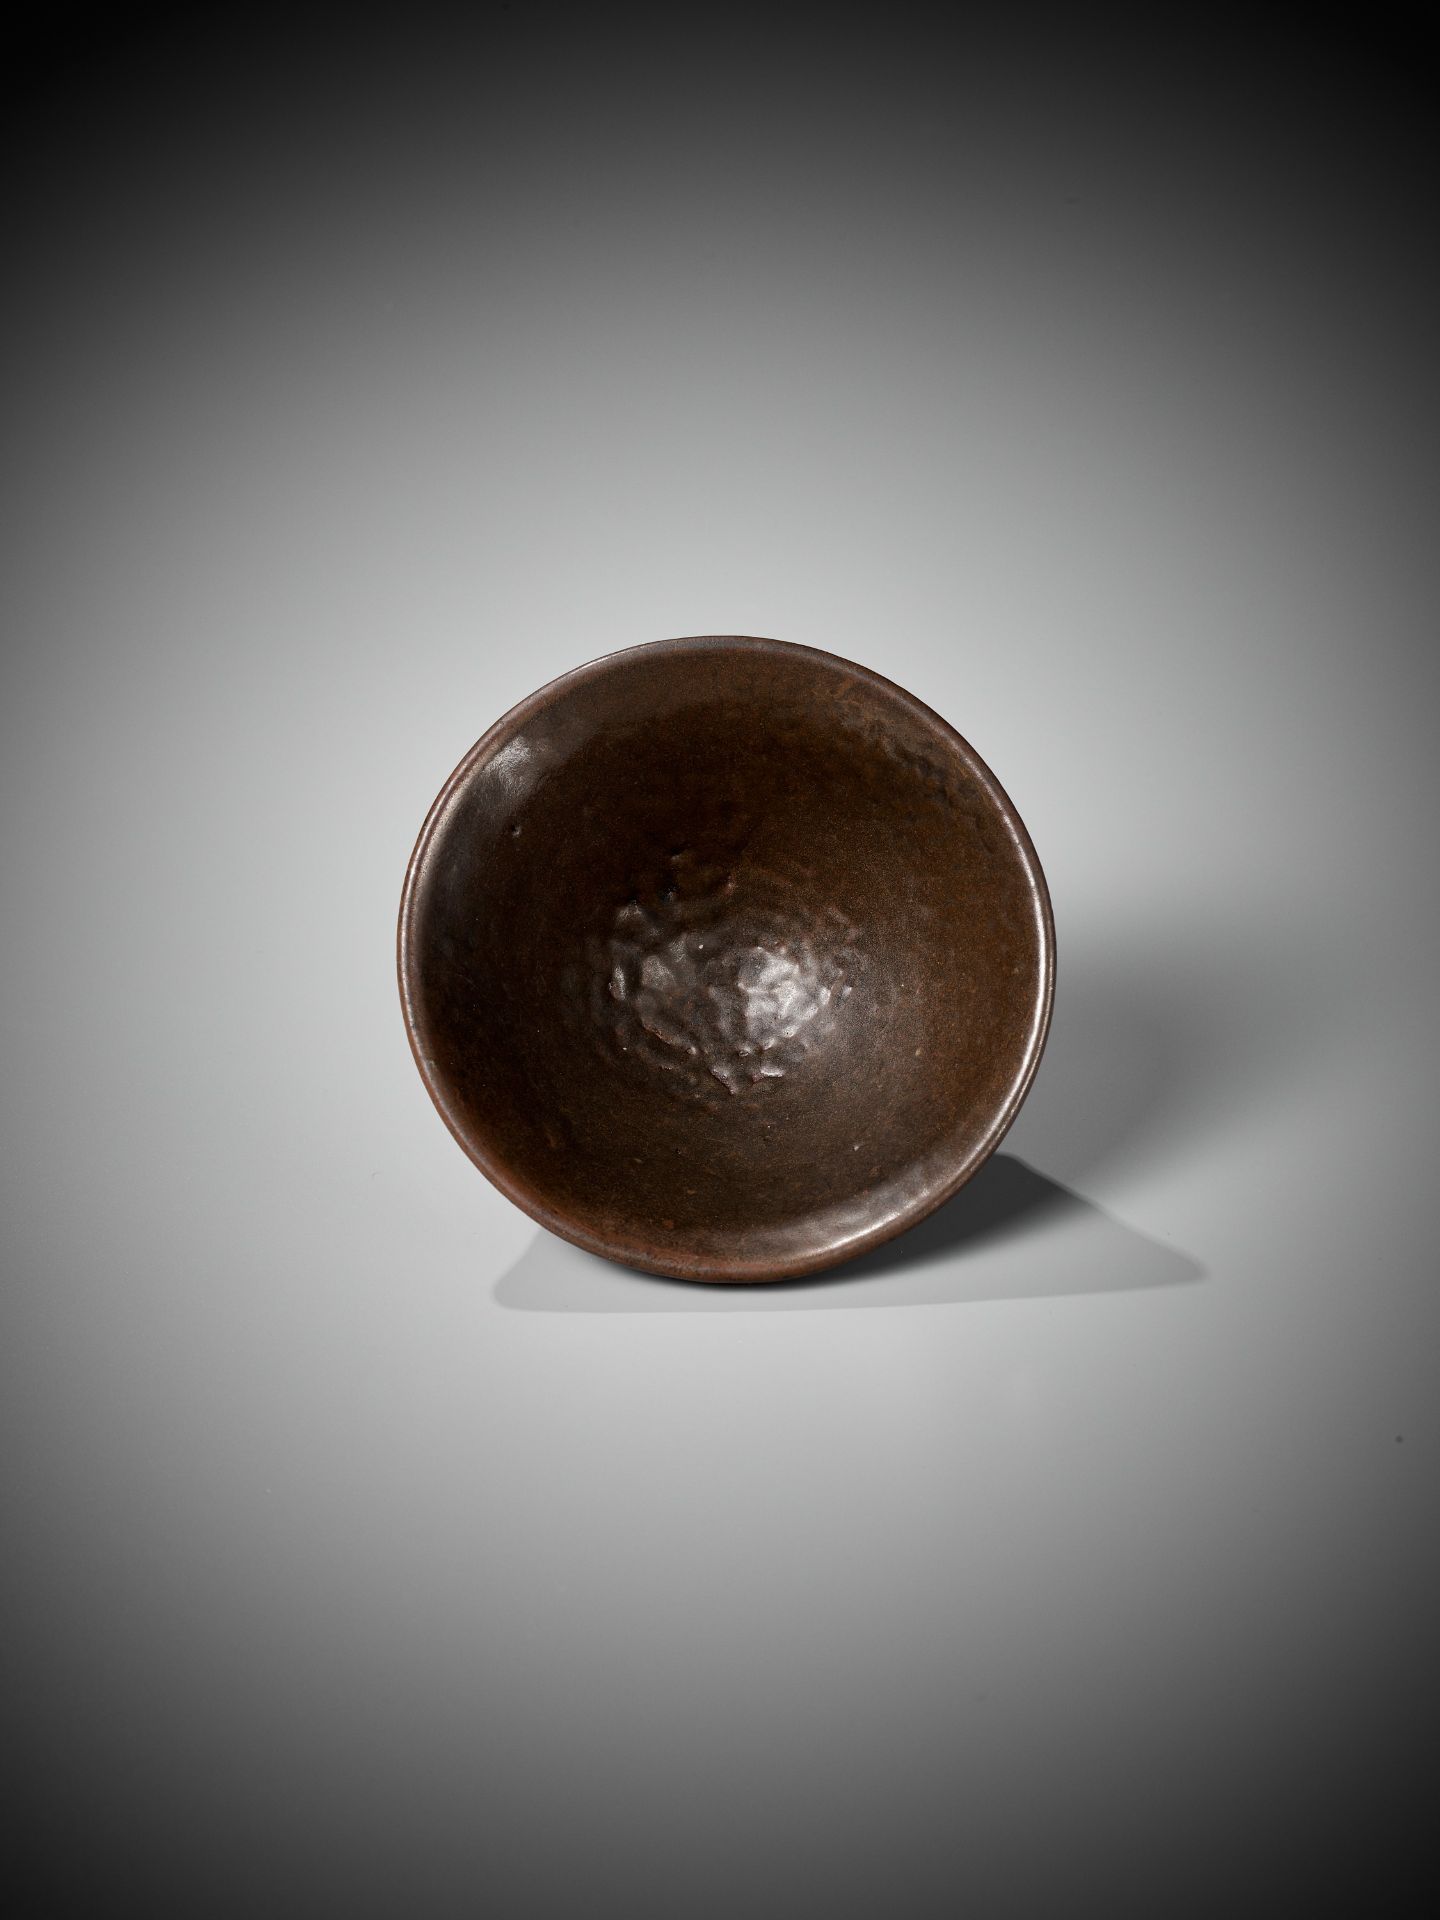 A JIAN PERSIMMON GLAZED TEA BOWL, SONG DYNASTY - Image 2 of 7